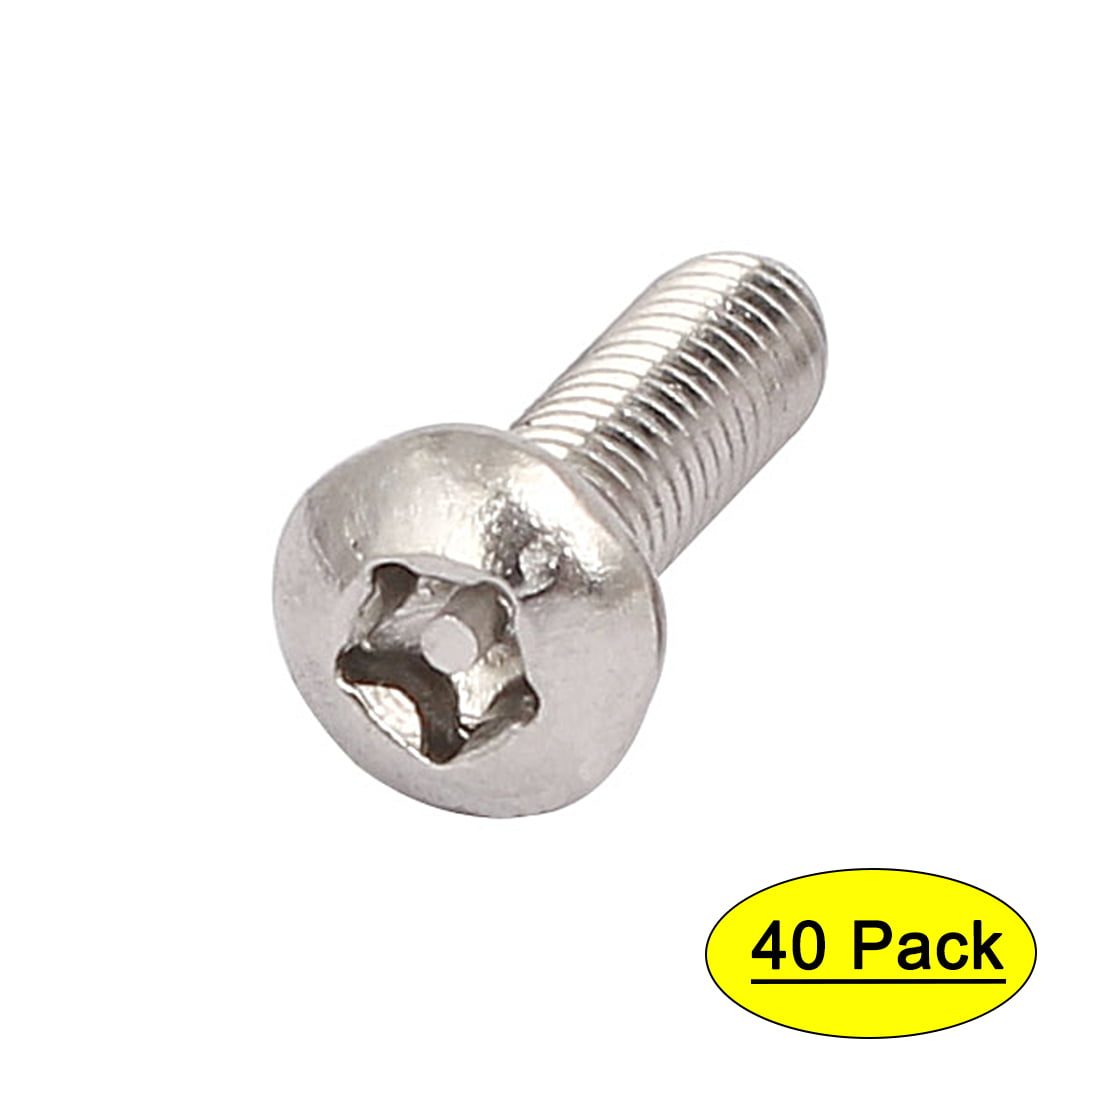 Qty 10 Countersunk Post Torx M8 x 35mm Stainless T40 Security Screw Tamperproof